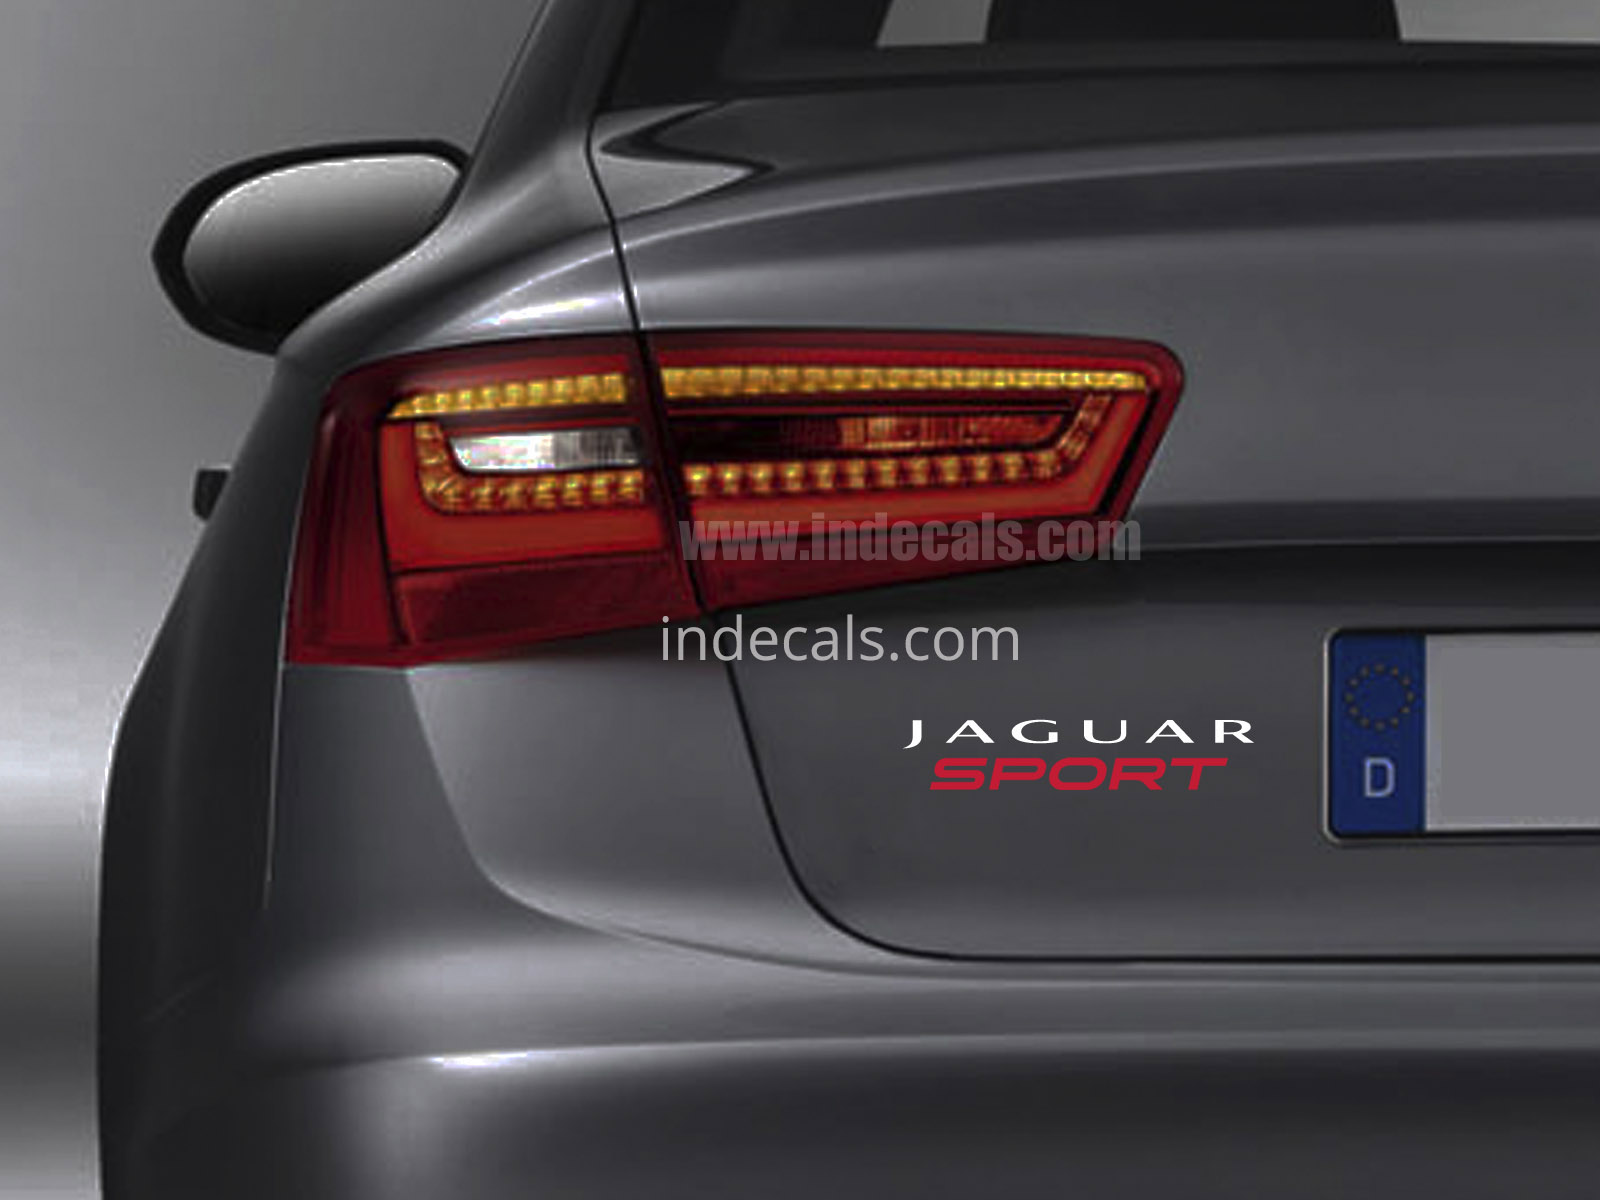 1 x Jaguar Sports Sticker for Trunk - White & Red